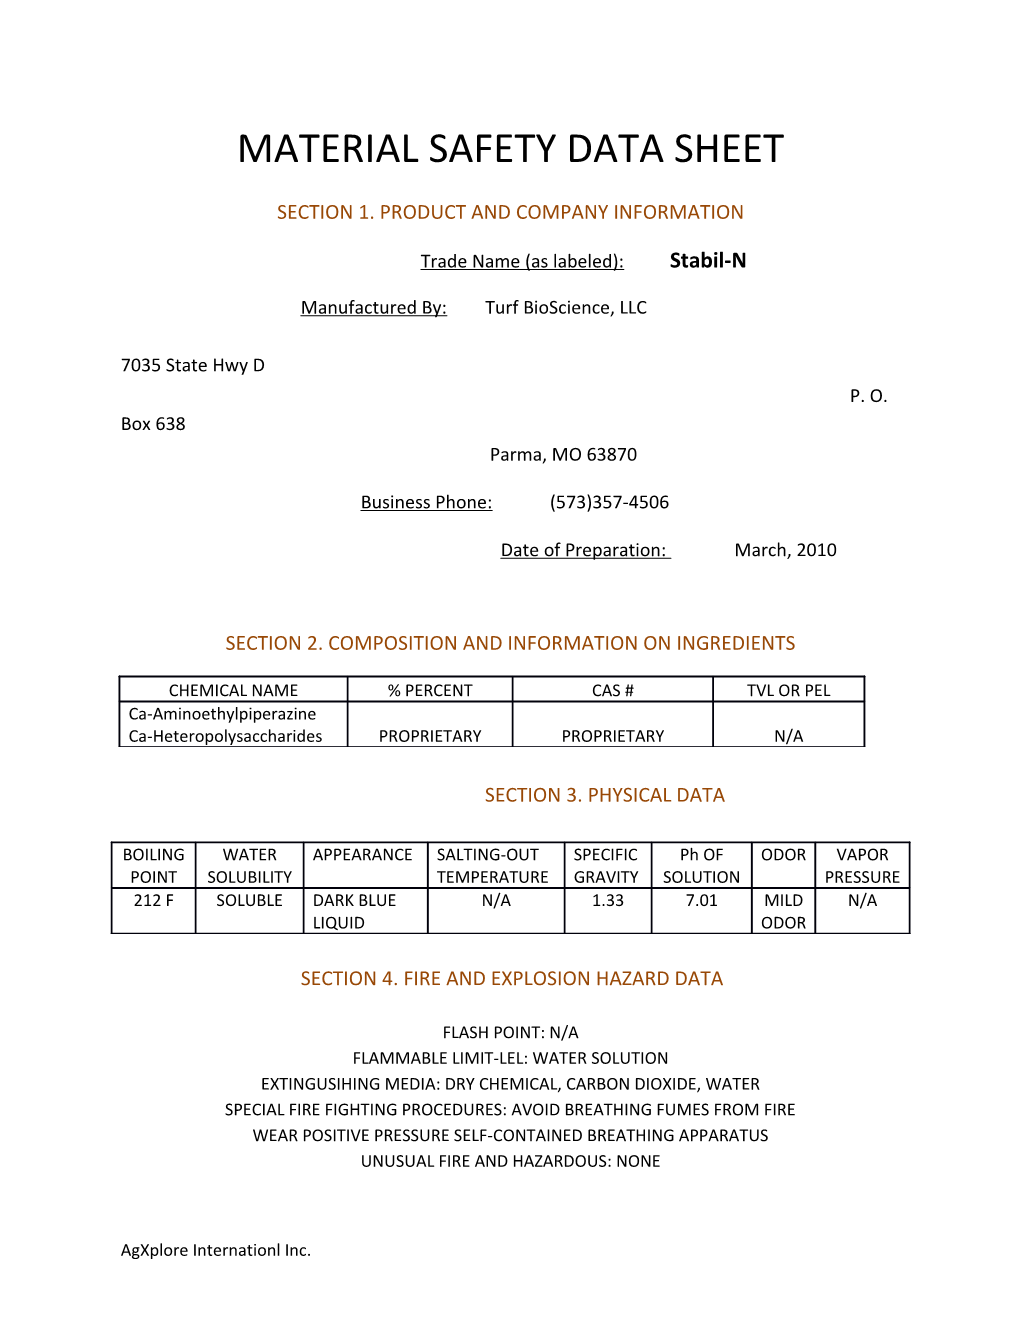 Material Safety Data Sheet s125